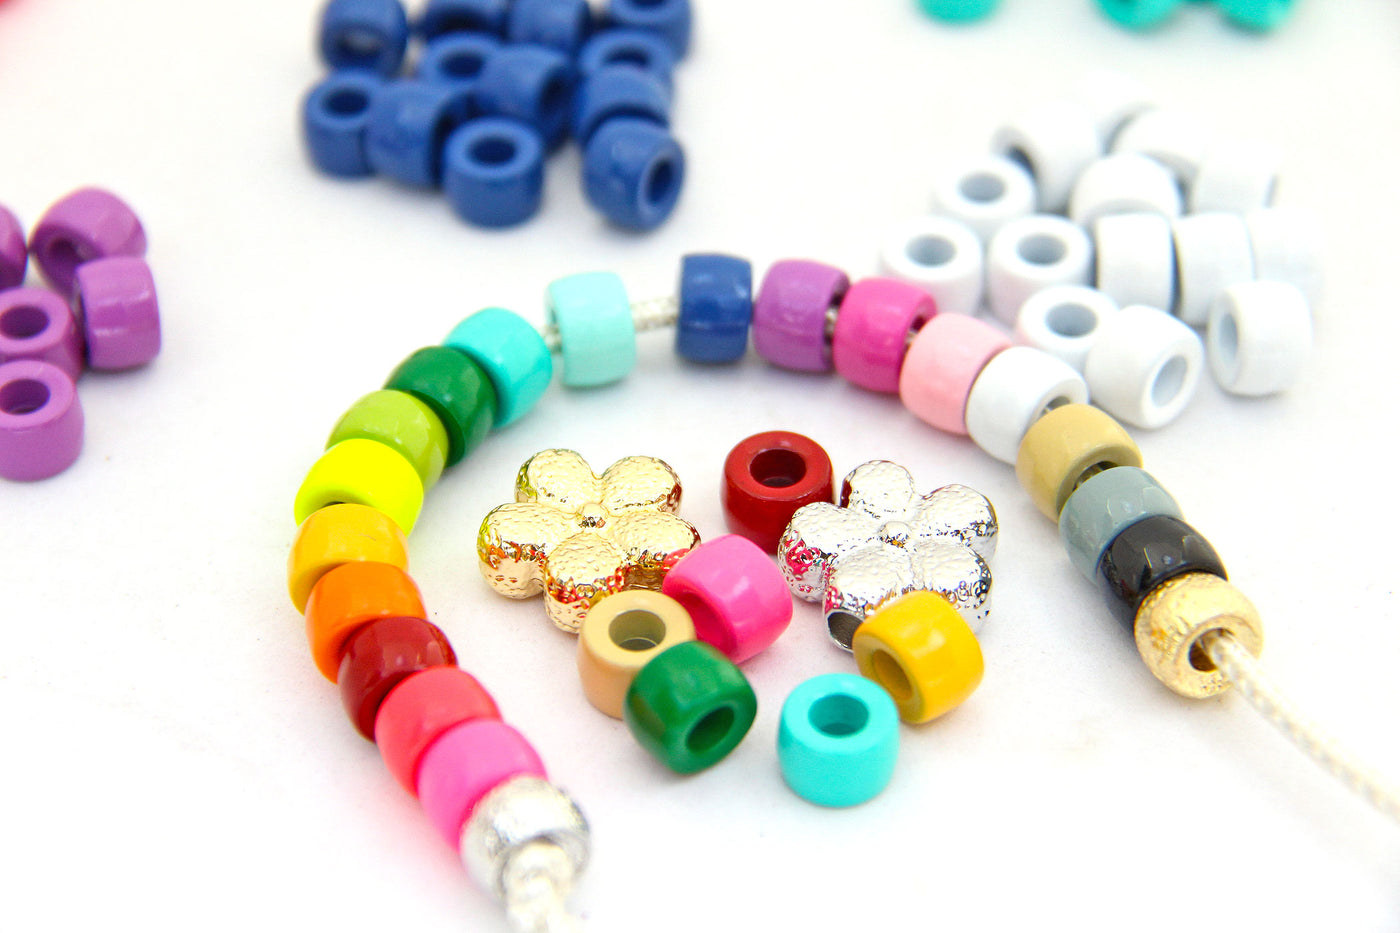 20pcs 5x6mm Tube Enamel Beads Painted Grease Colorful Beads For Bracelets  Making Rainbow Jewelry Making Accessory Supplier